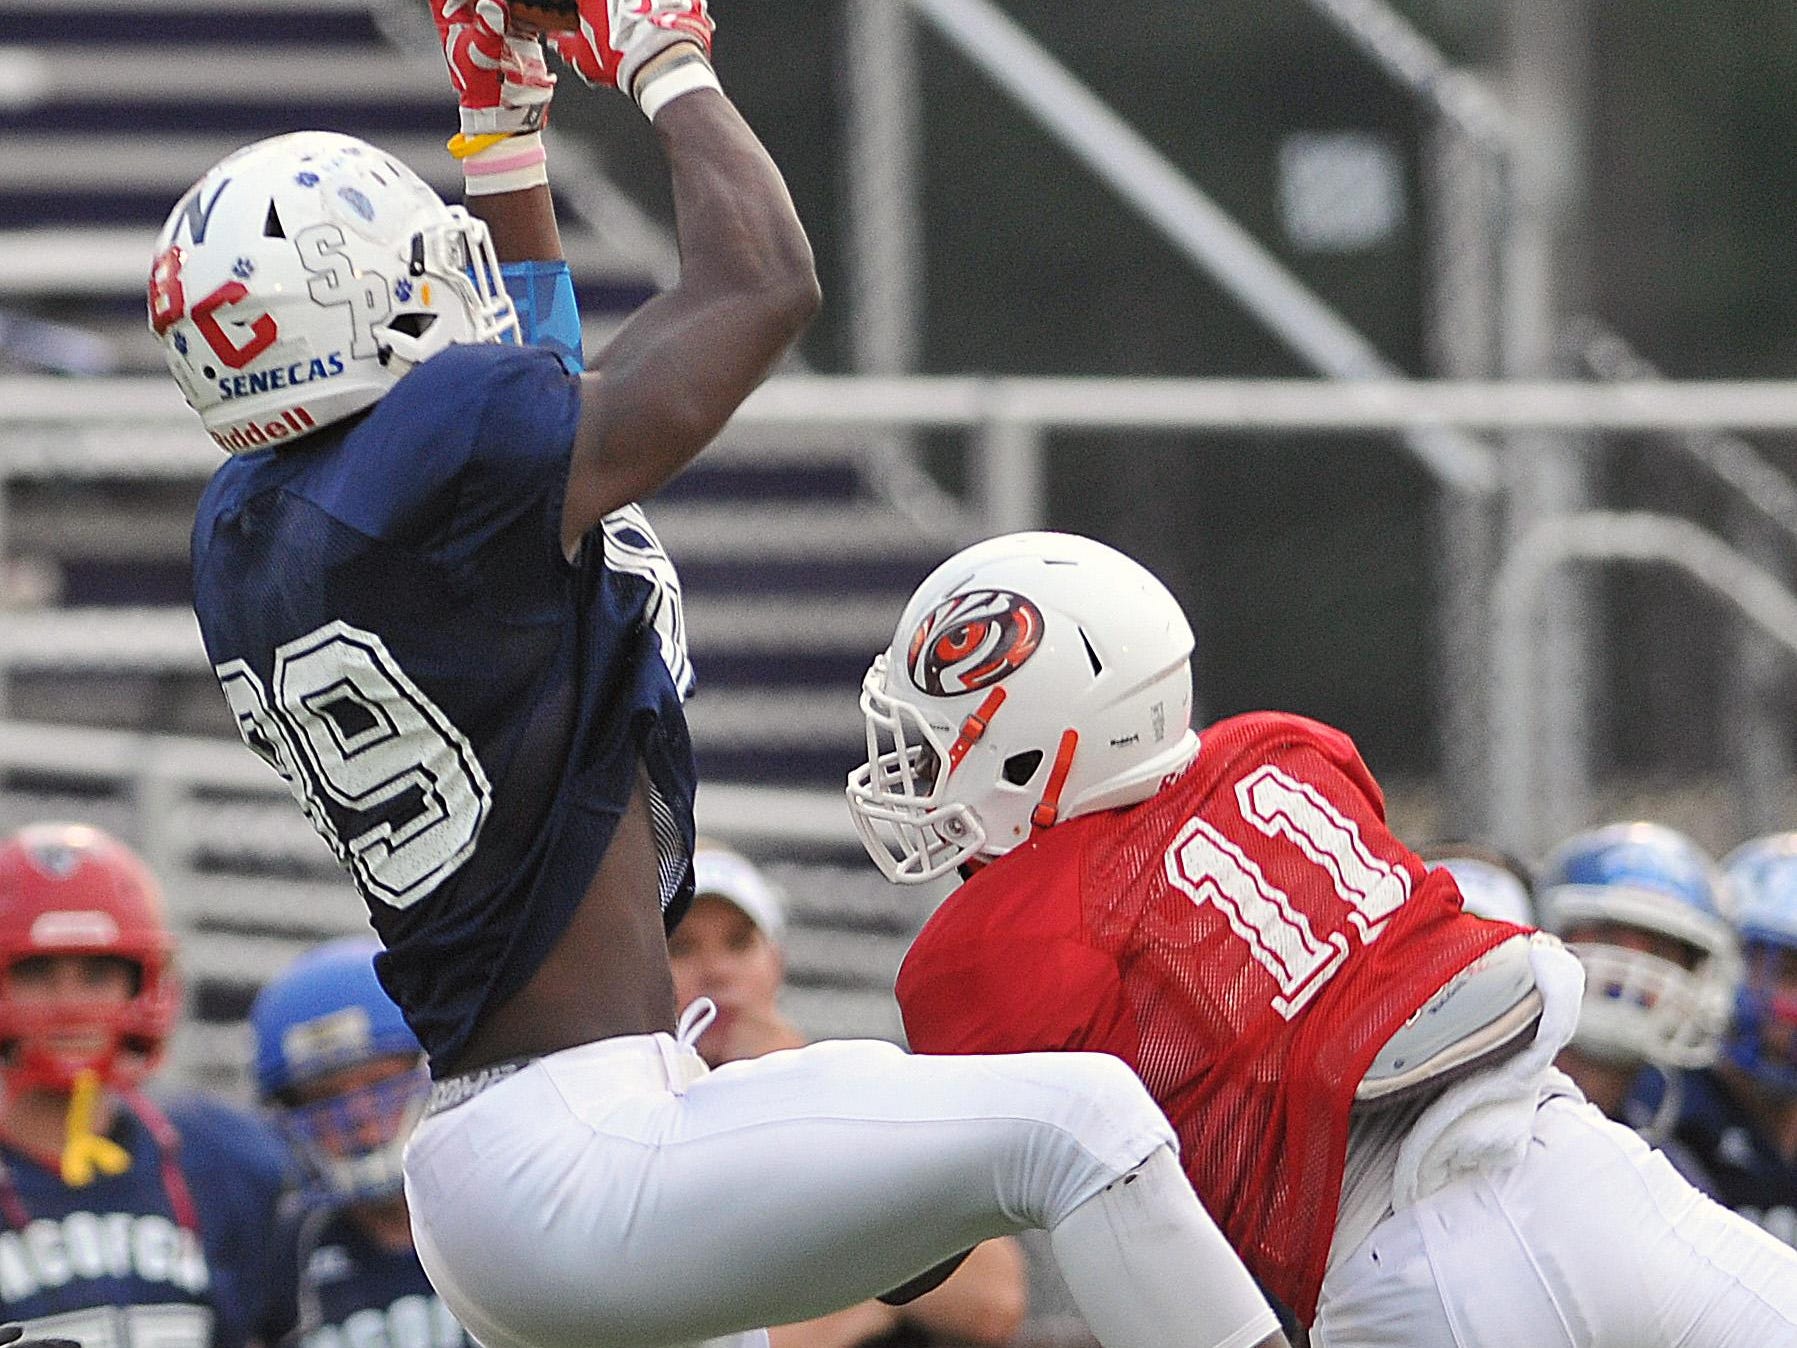 The North’s Tyrell Edmiston comes down with a catch during the Saturday’s All-Star game.